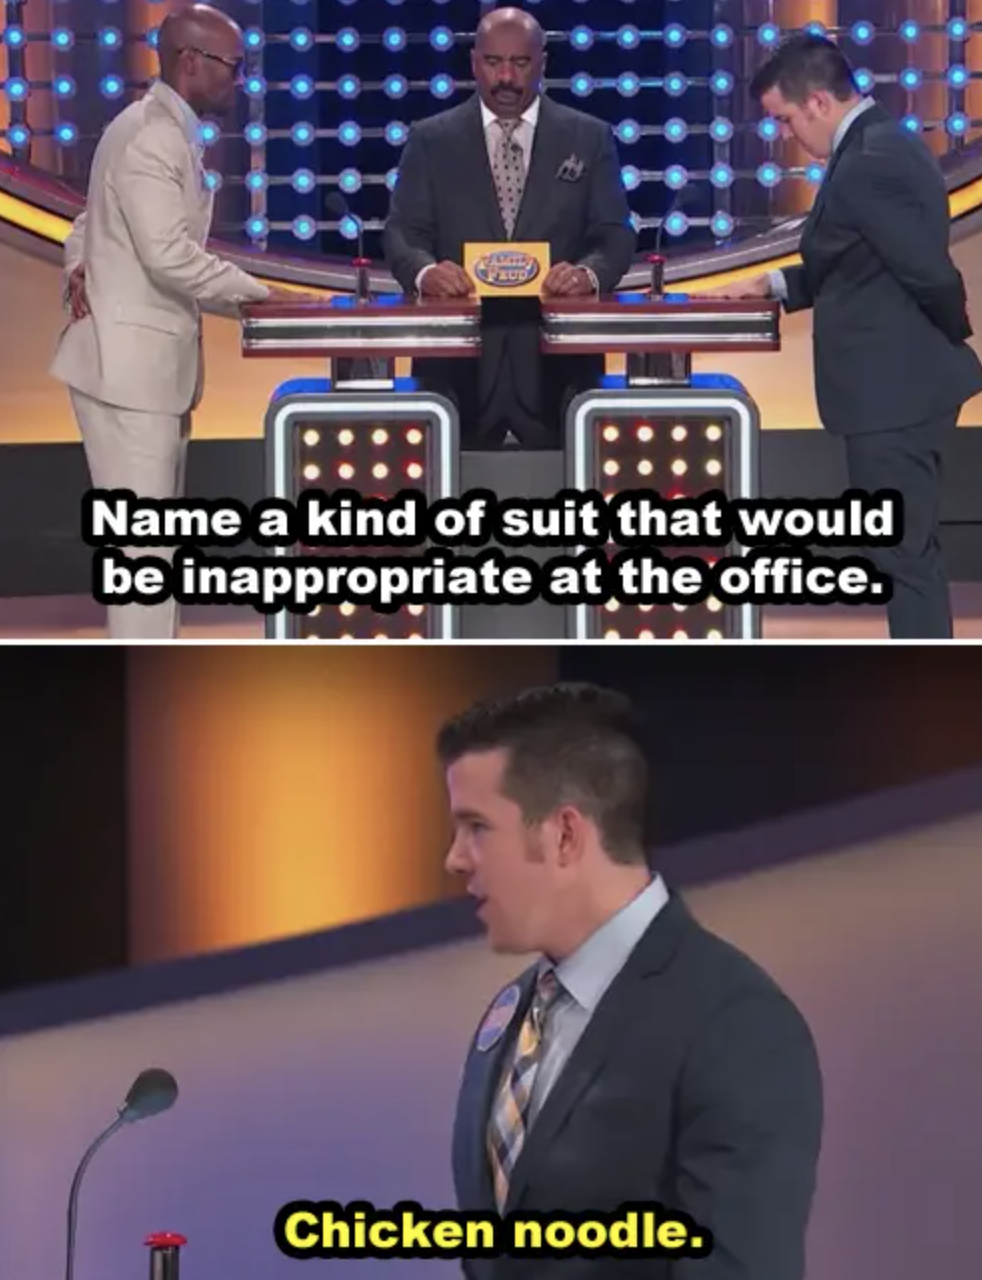 a suit that would be appropriate at the office, contestant says chicken noodle